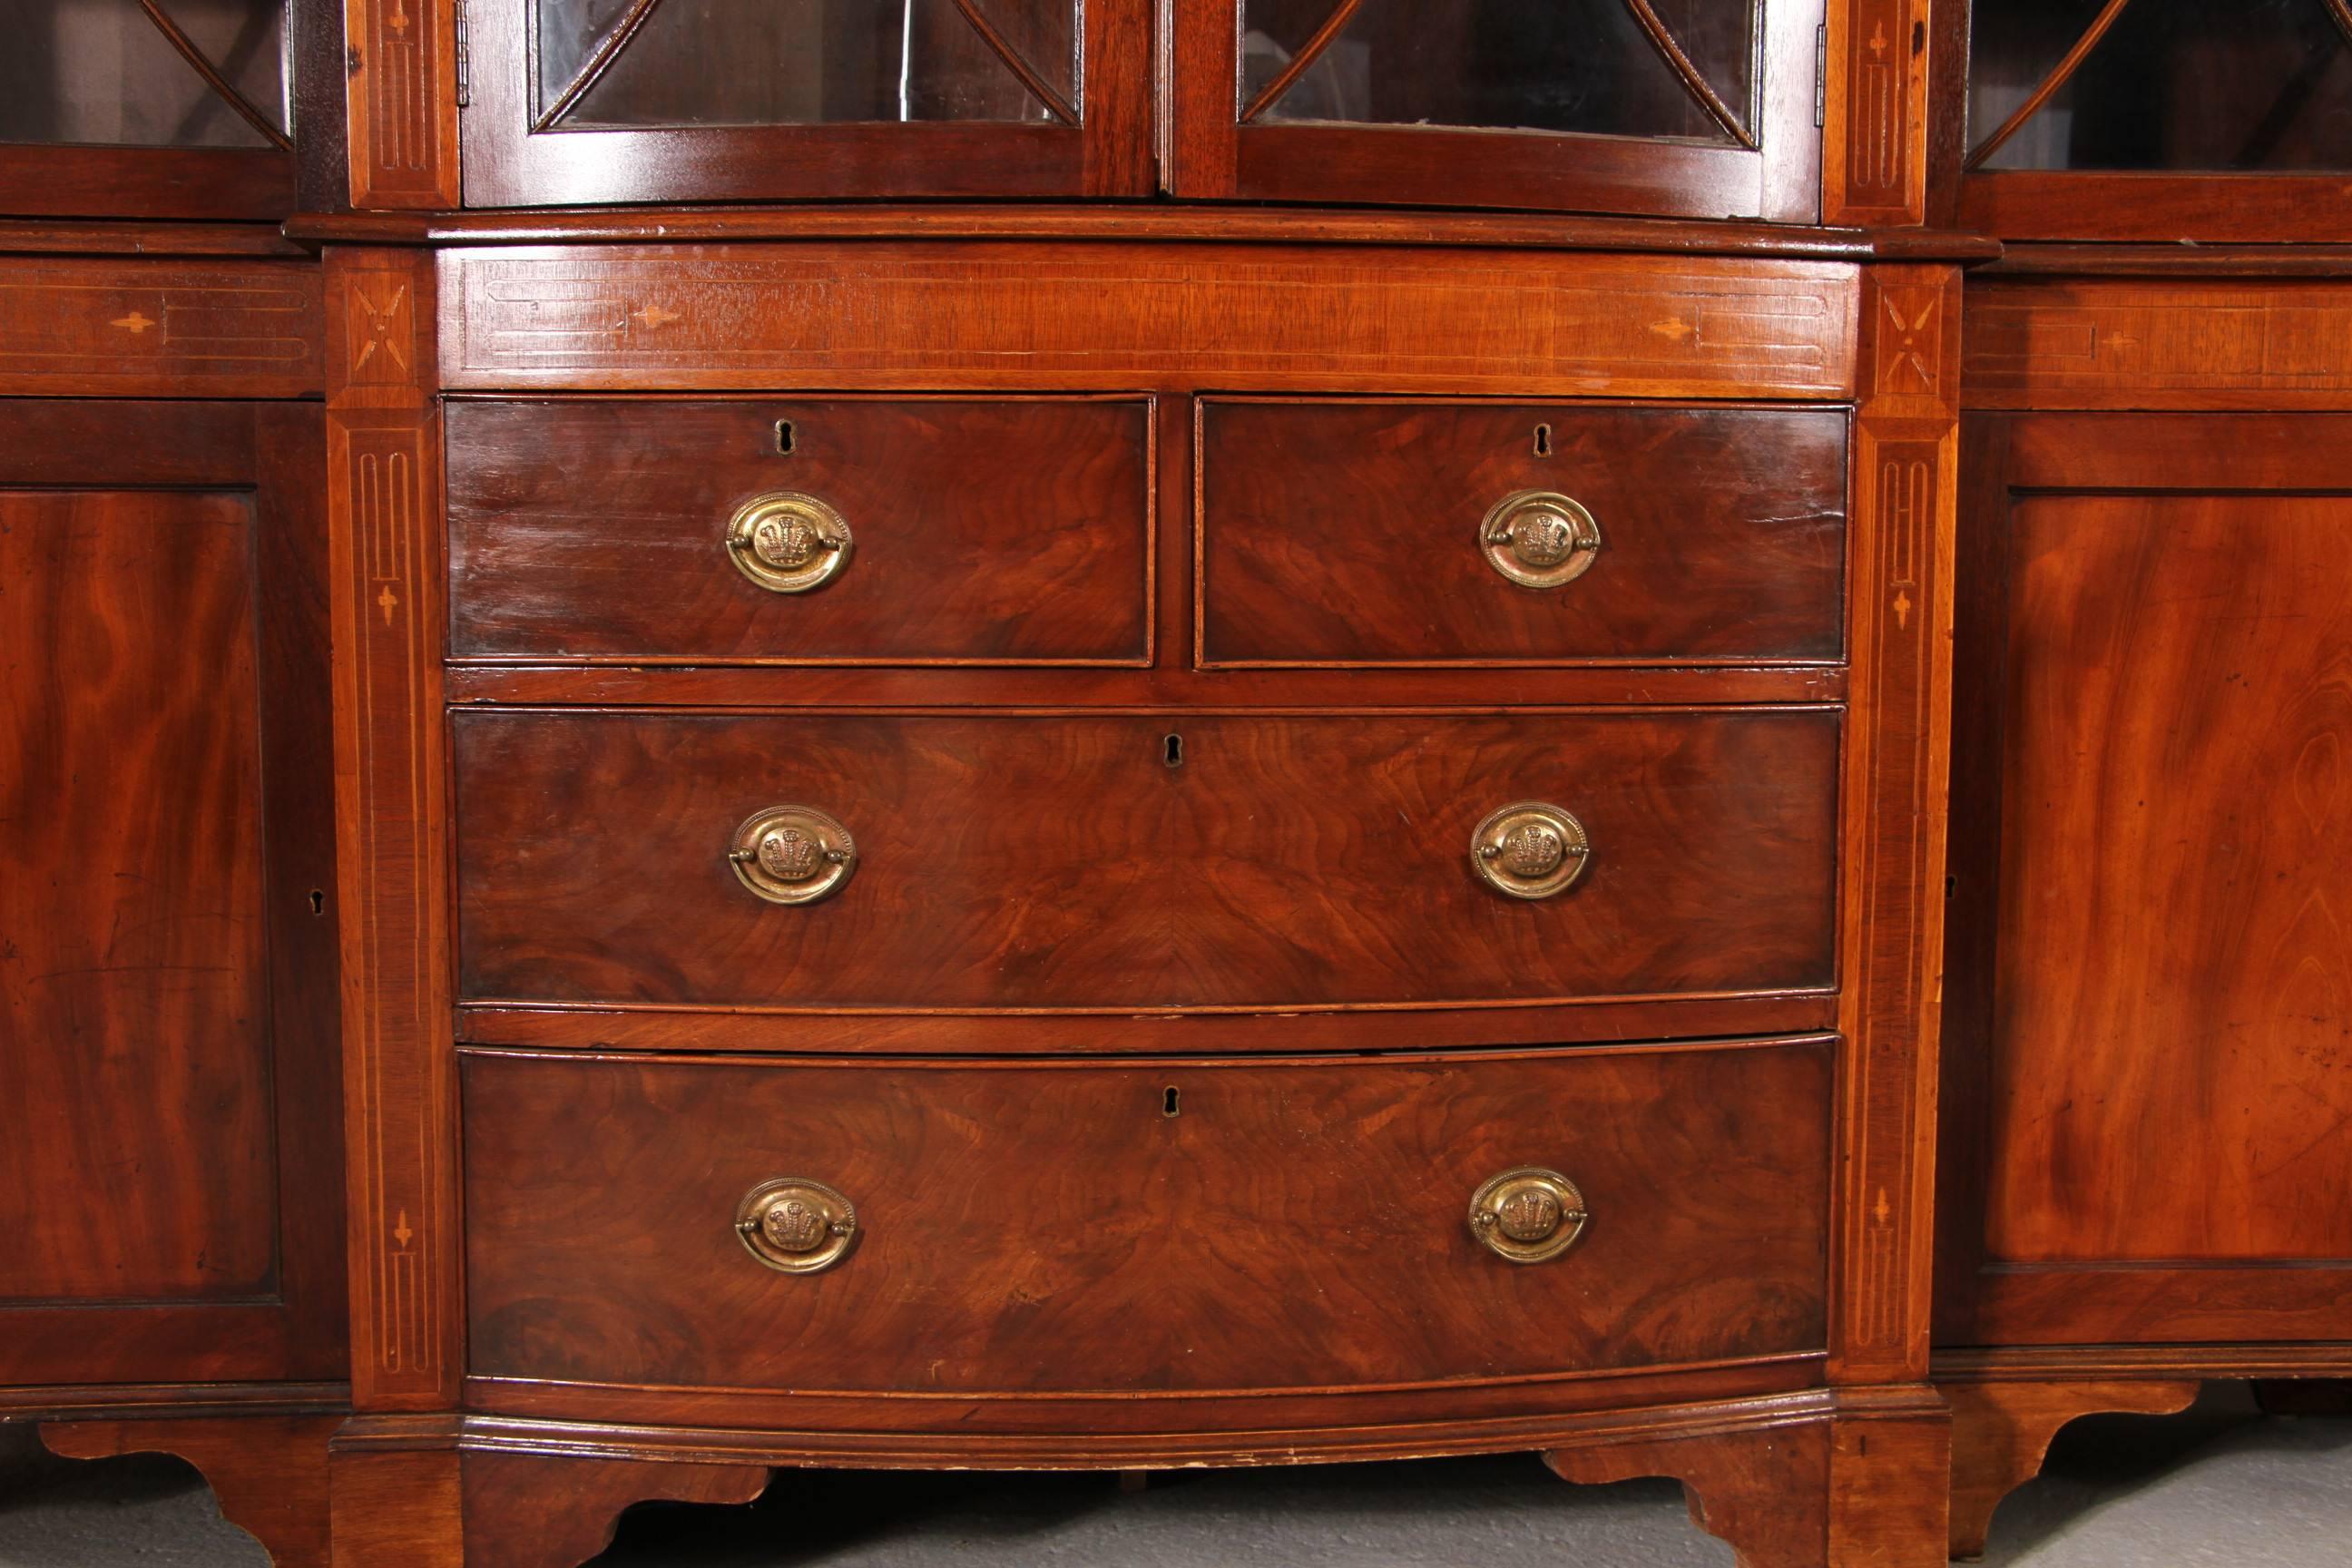 Beautifully finished and well proportioned antique mahogany English breakfront or bookcase with overall satinwood inlay, bowed center panels, divided glass paneled doors, scroll cut bracket feet, and decorative oval brass pulls. Age appropriate